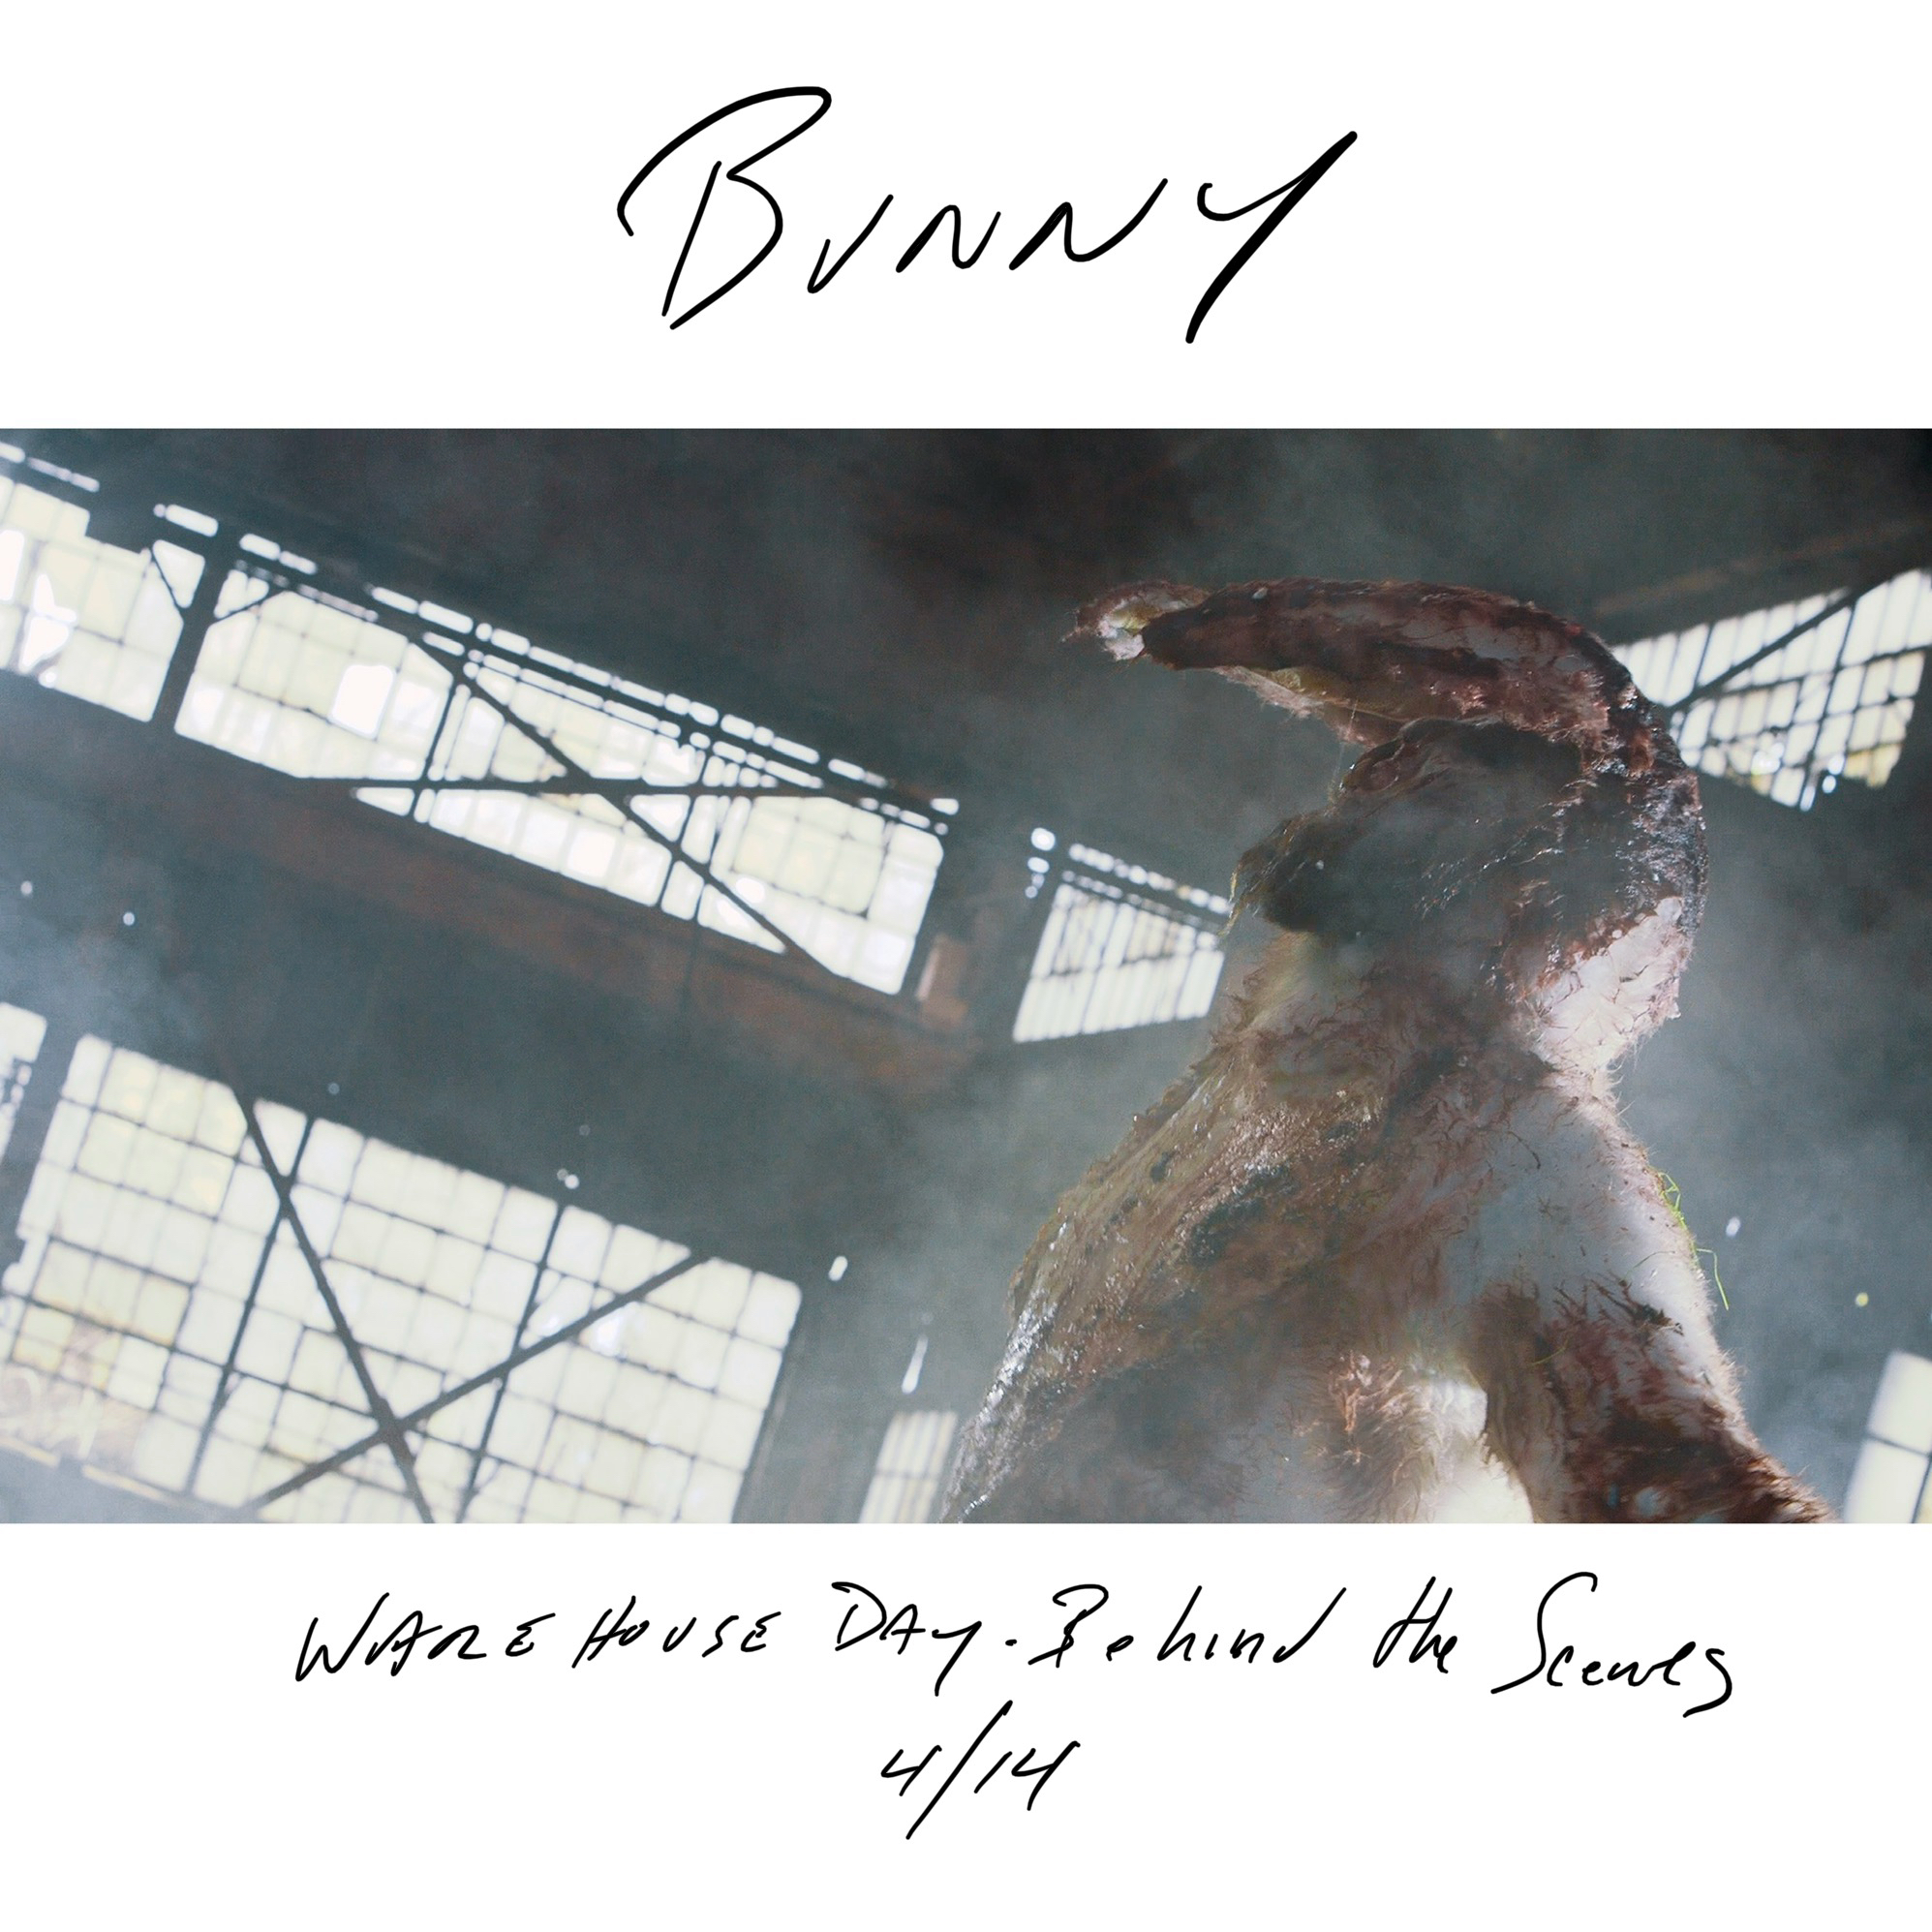 monster creature from the short film 'Bunny'